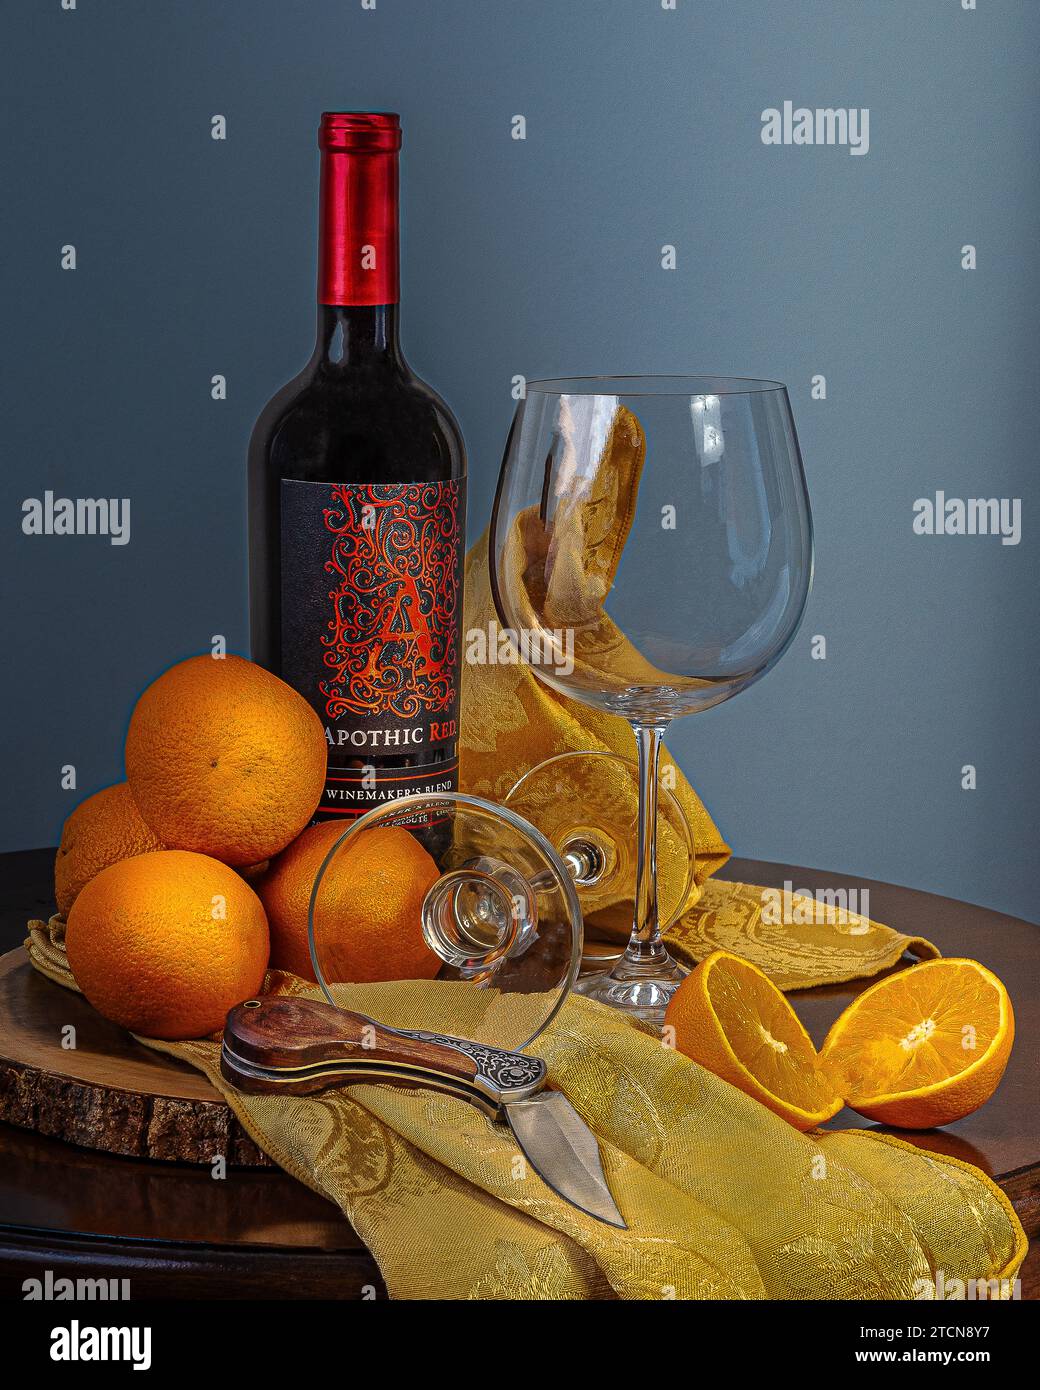 Photo still life. A dark and atmospheric photo of a still life, a bottle of wine, glasses, oranges. Stock Photo